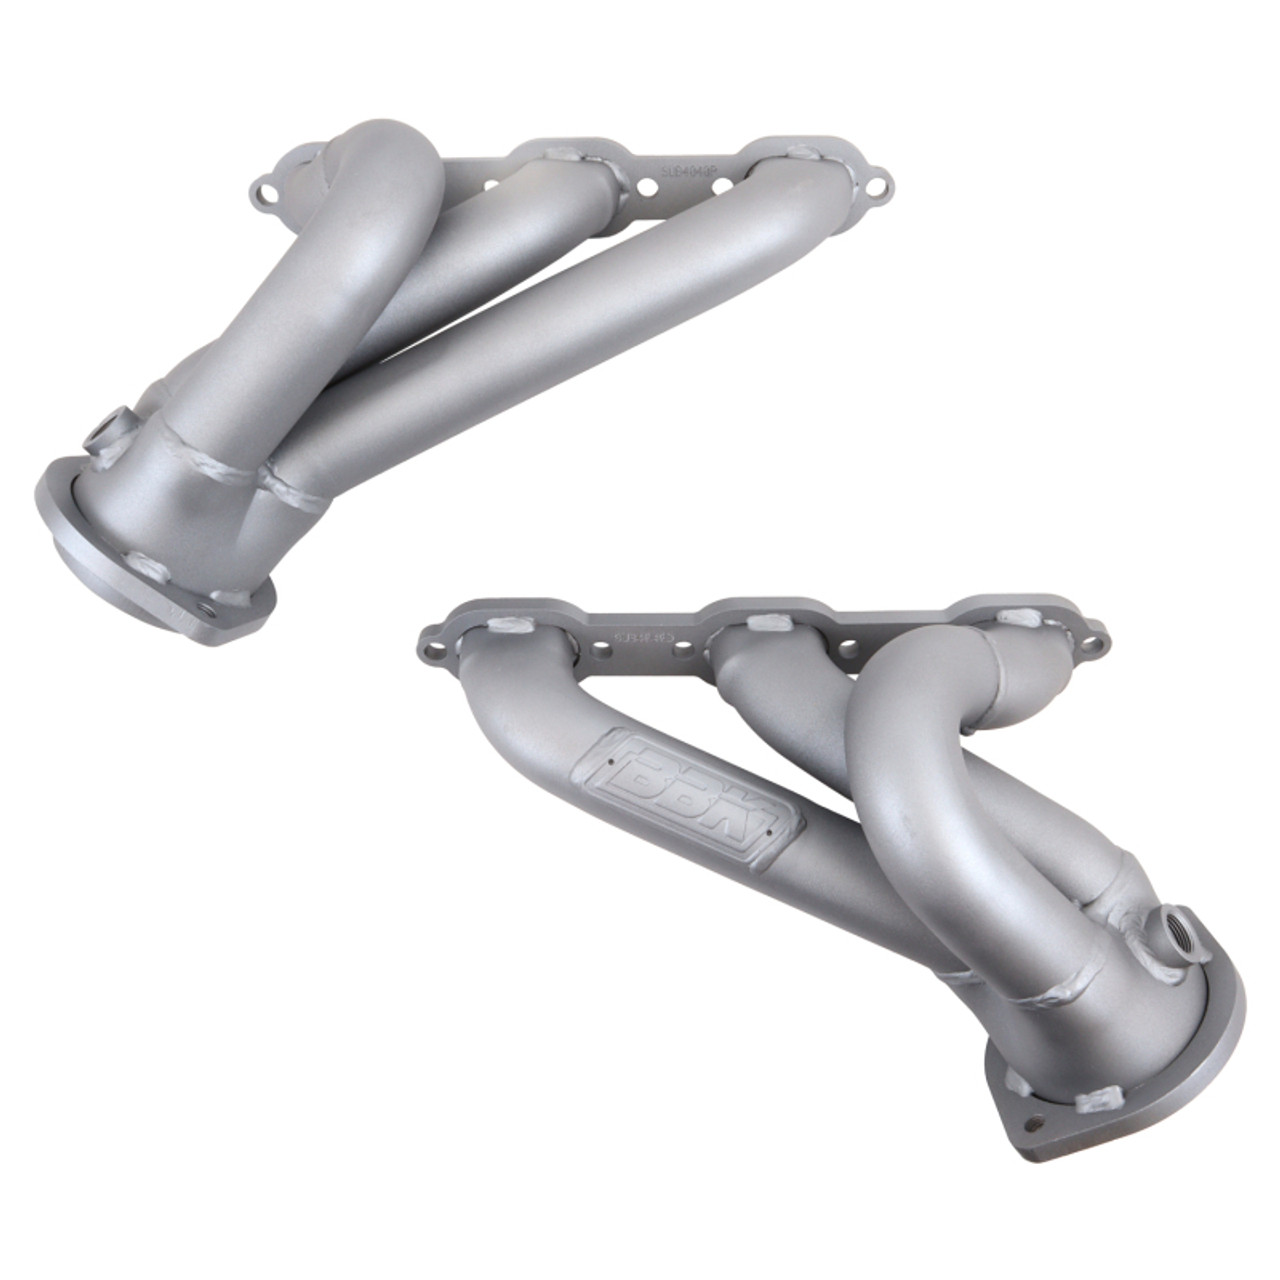 BBK 06-10 Dodge Charger / Chrysler 300 3.5L V6 1-5/8 Shorty Tuned Length Headers - Titanium Ceramic - 4040 Photo - out of package